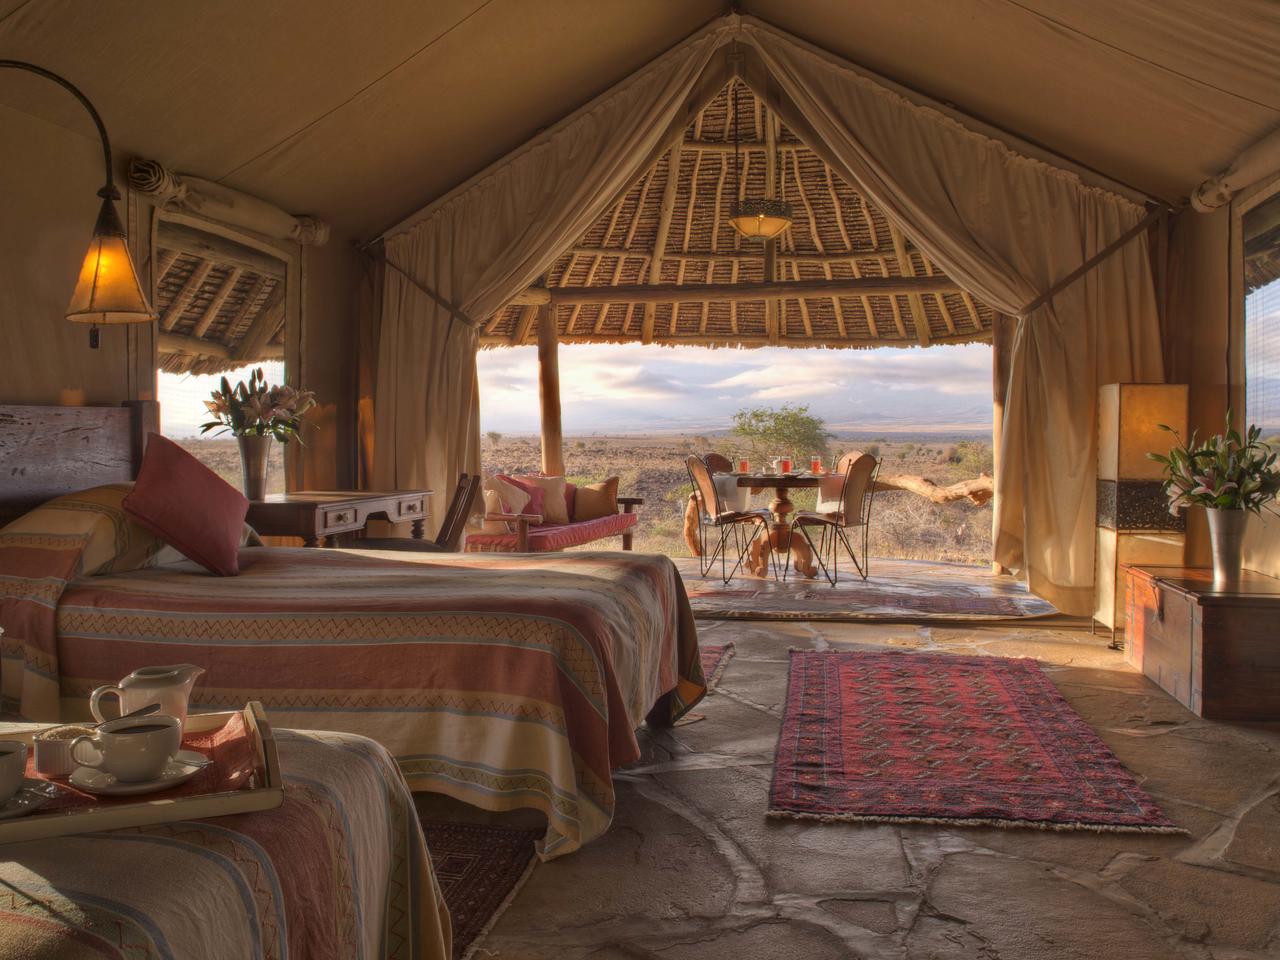 A room with a view Amboseli